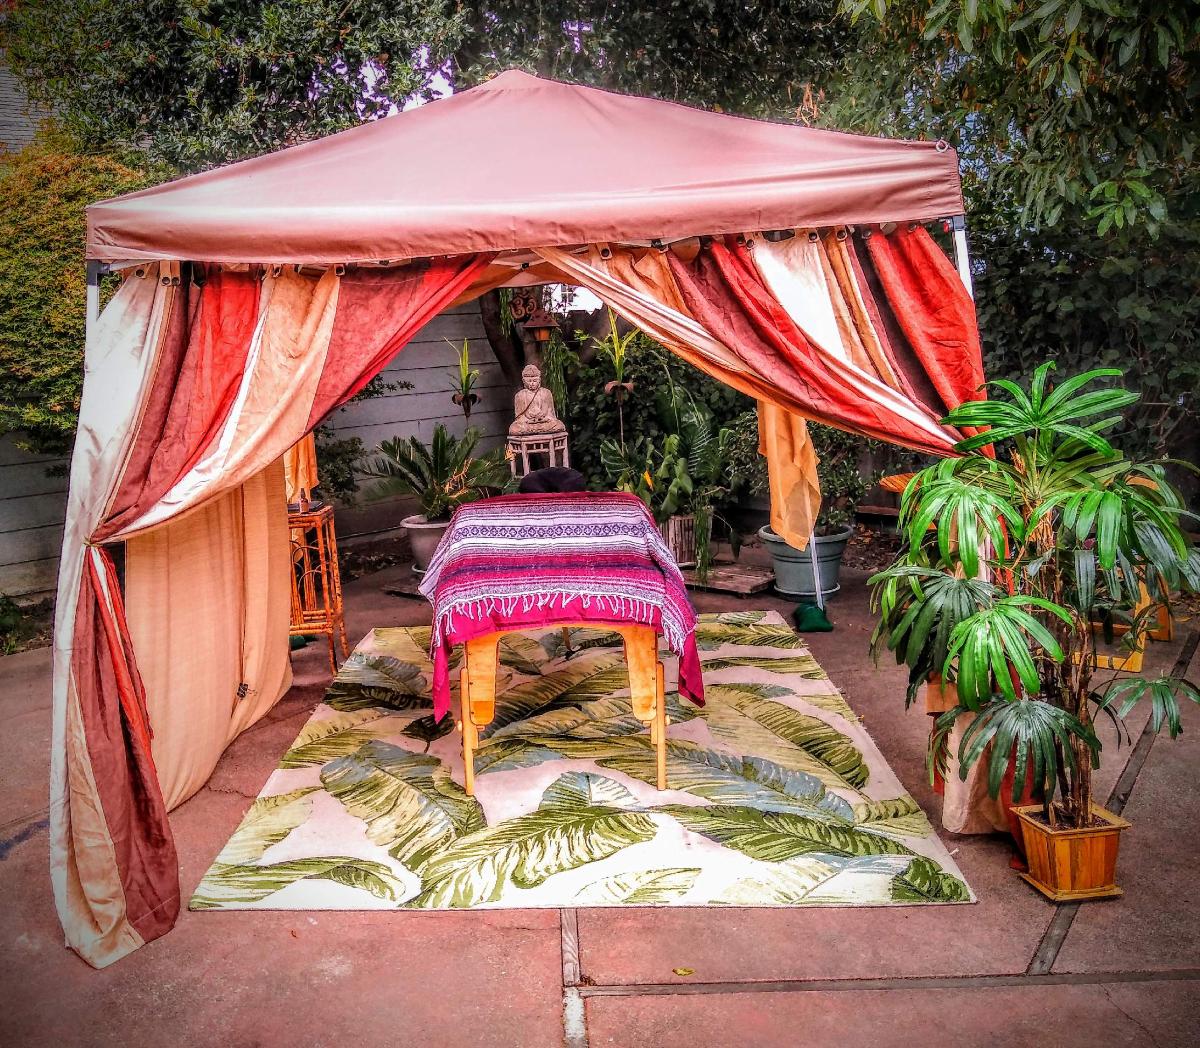 An outdoor massage table set up under a shade structure